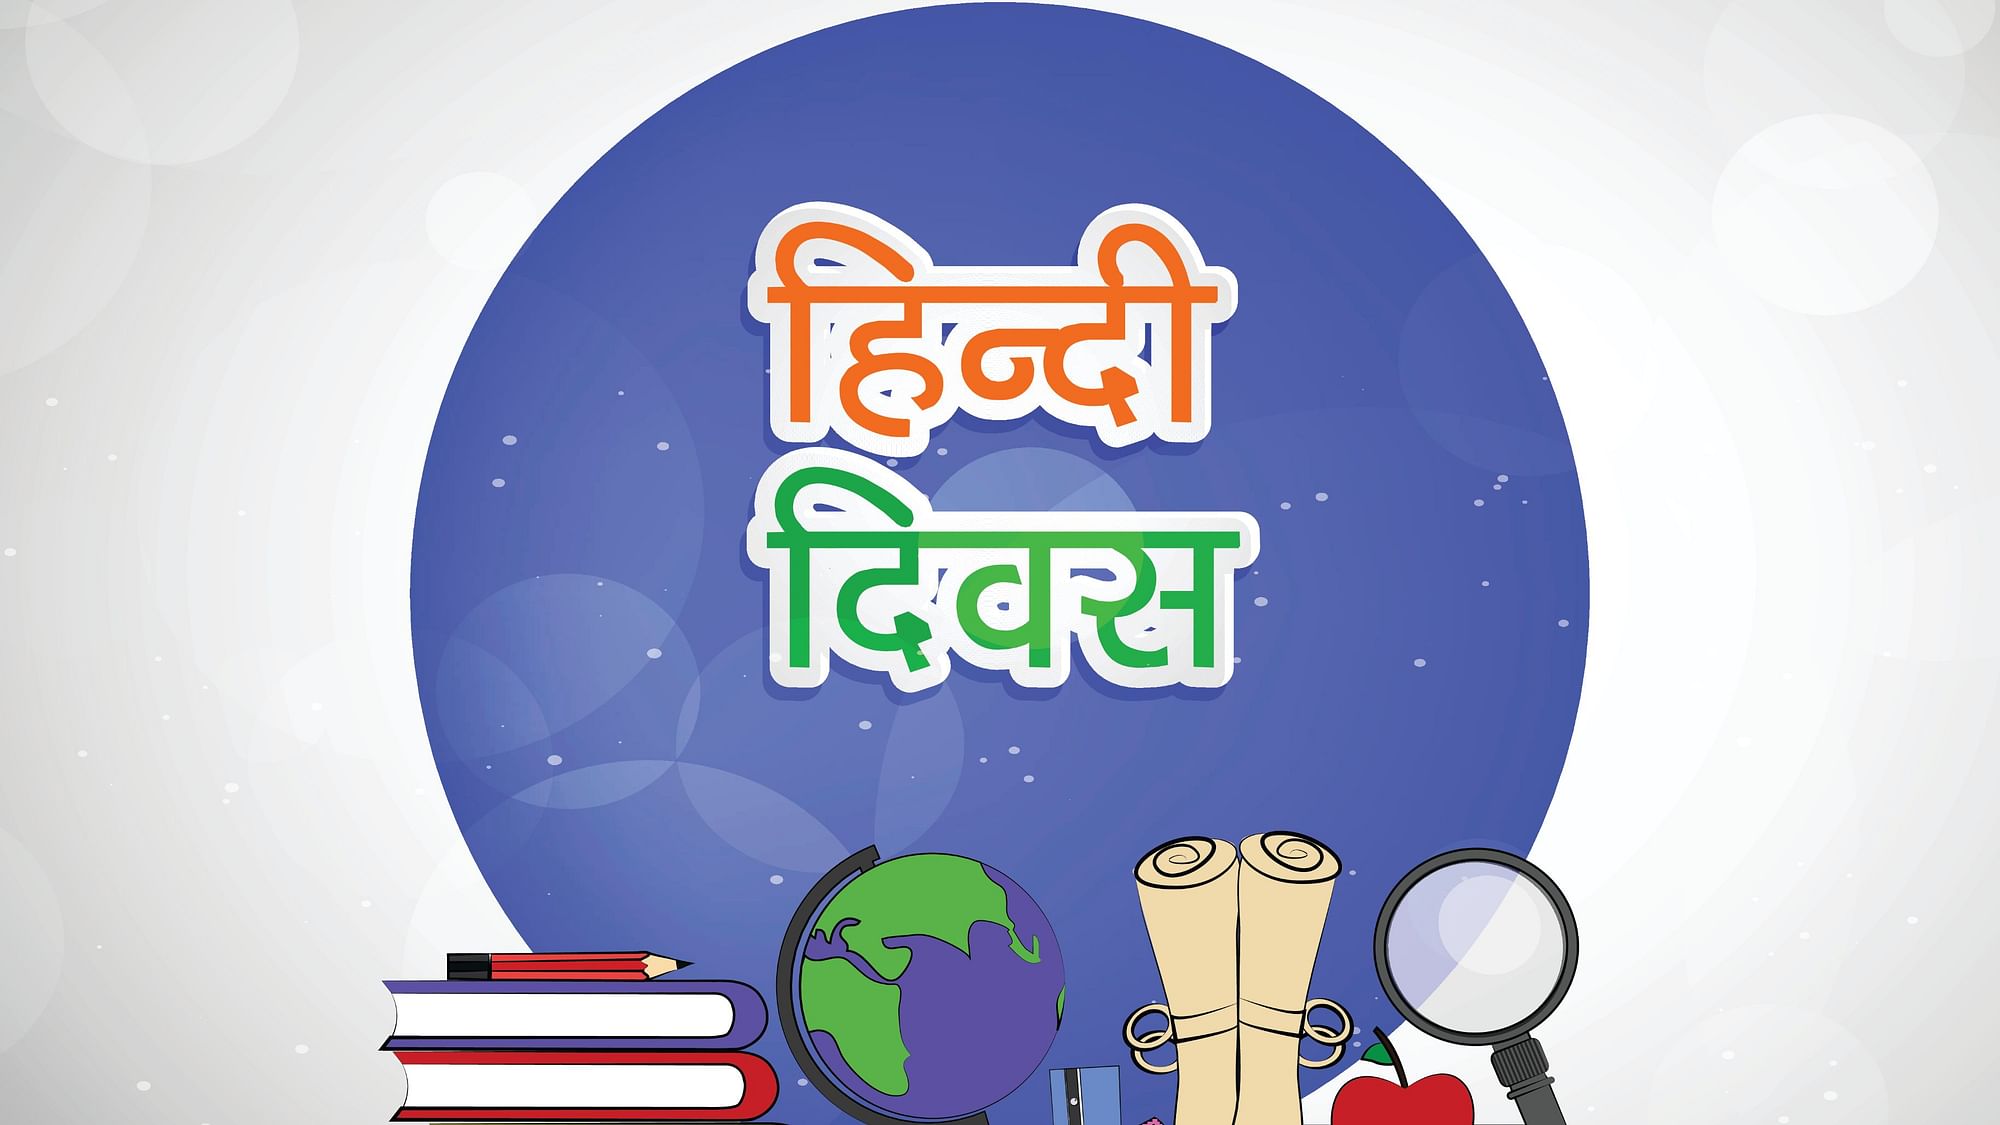 Hindi Diwas Wishes In English Happy Hindi Divas Quotes Wishes Images Greetings For Whatsapp Status Instagram Twitter Facebook Post